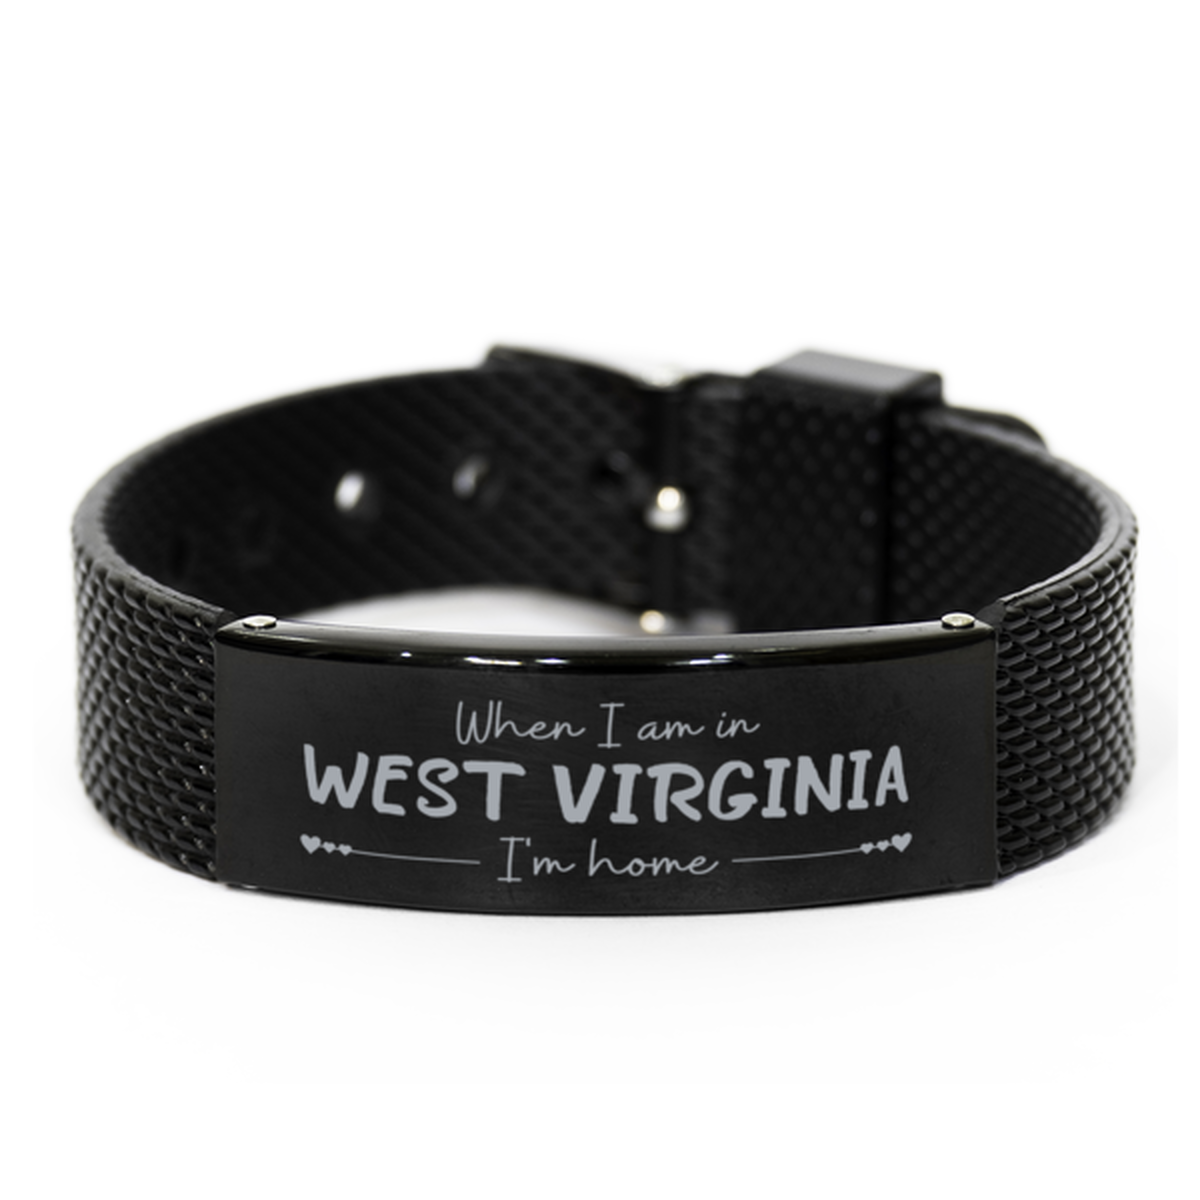 When I am in West Virginia I'm home Black Shark Mesh Bracelet, Cheap Gifts For West Virginia, State West Virginia Birthday Gifts for Friends Coworker